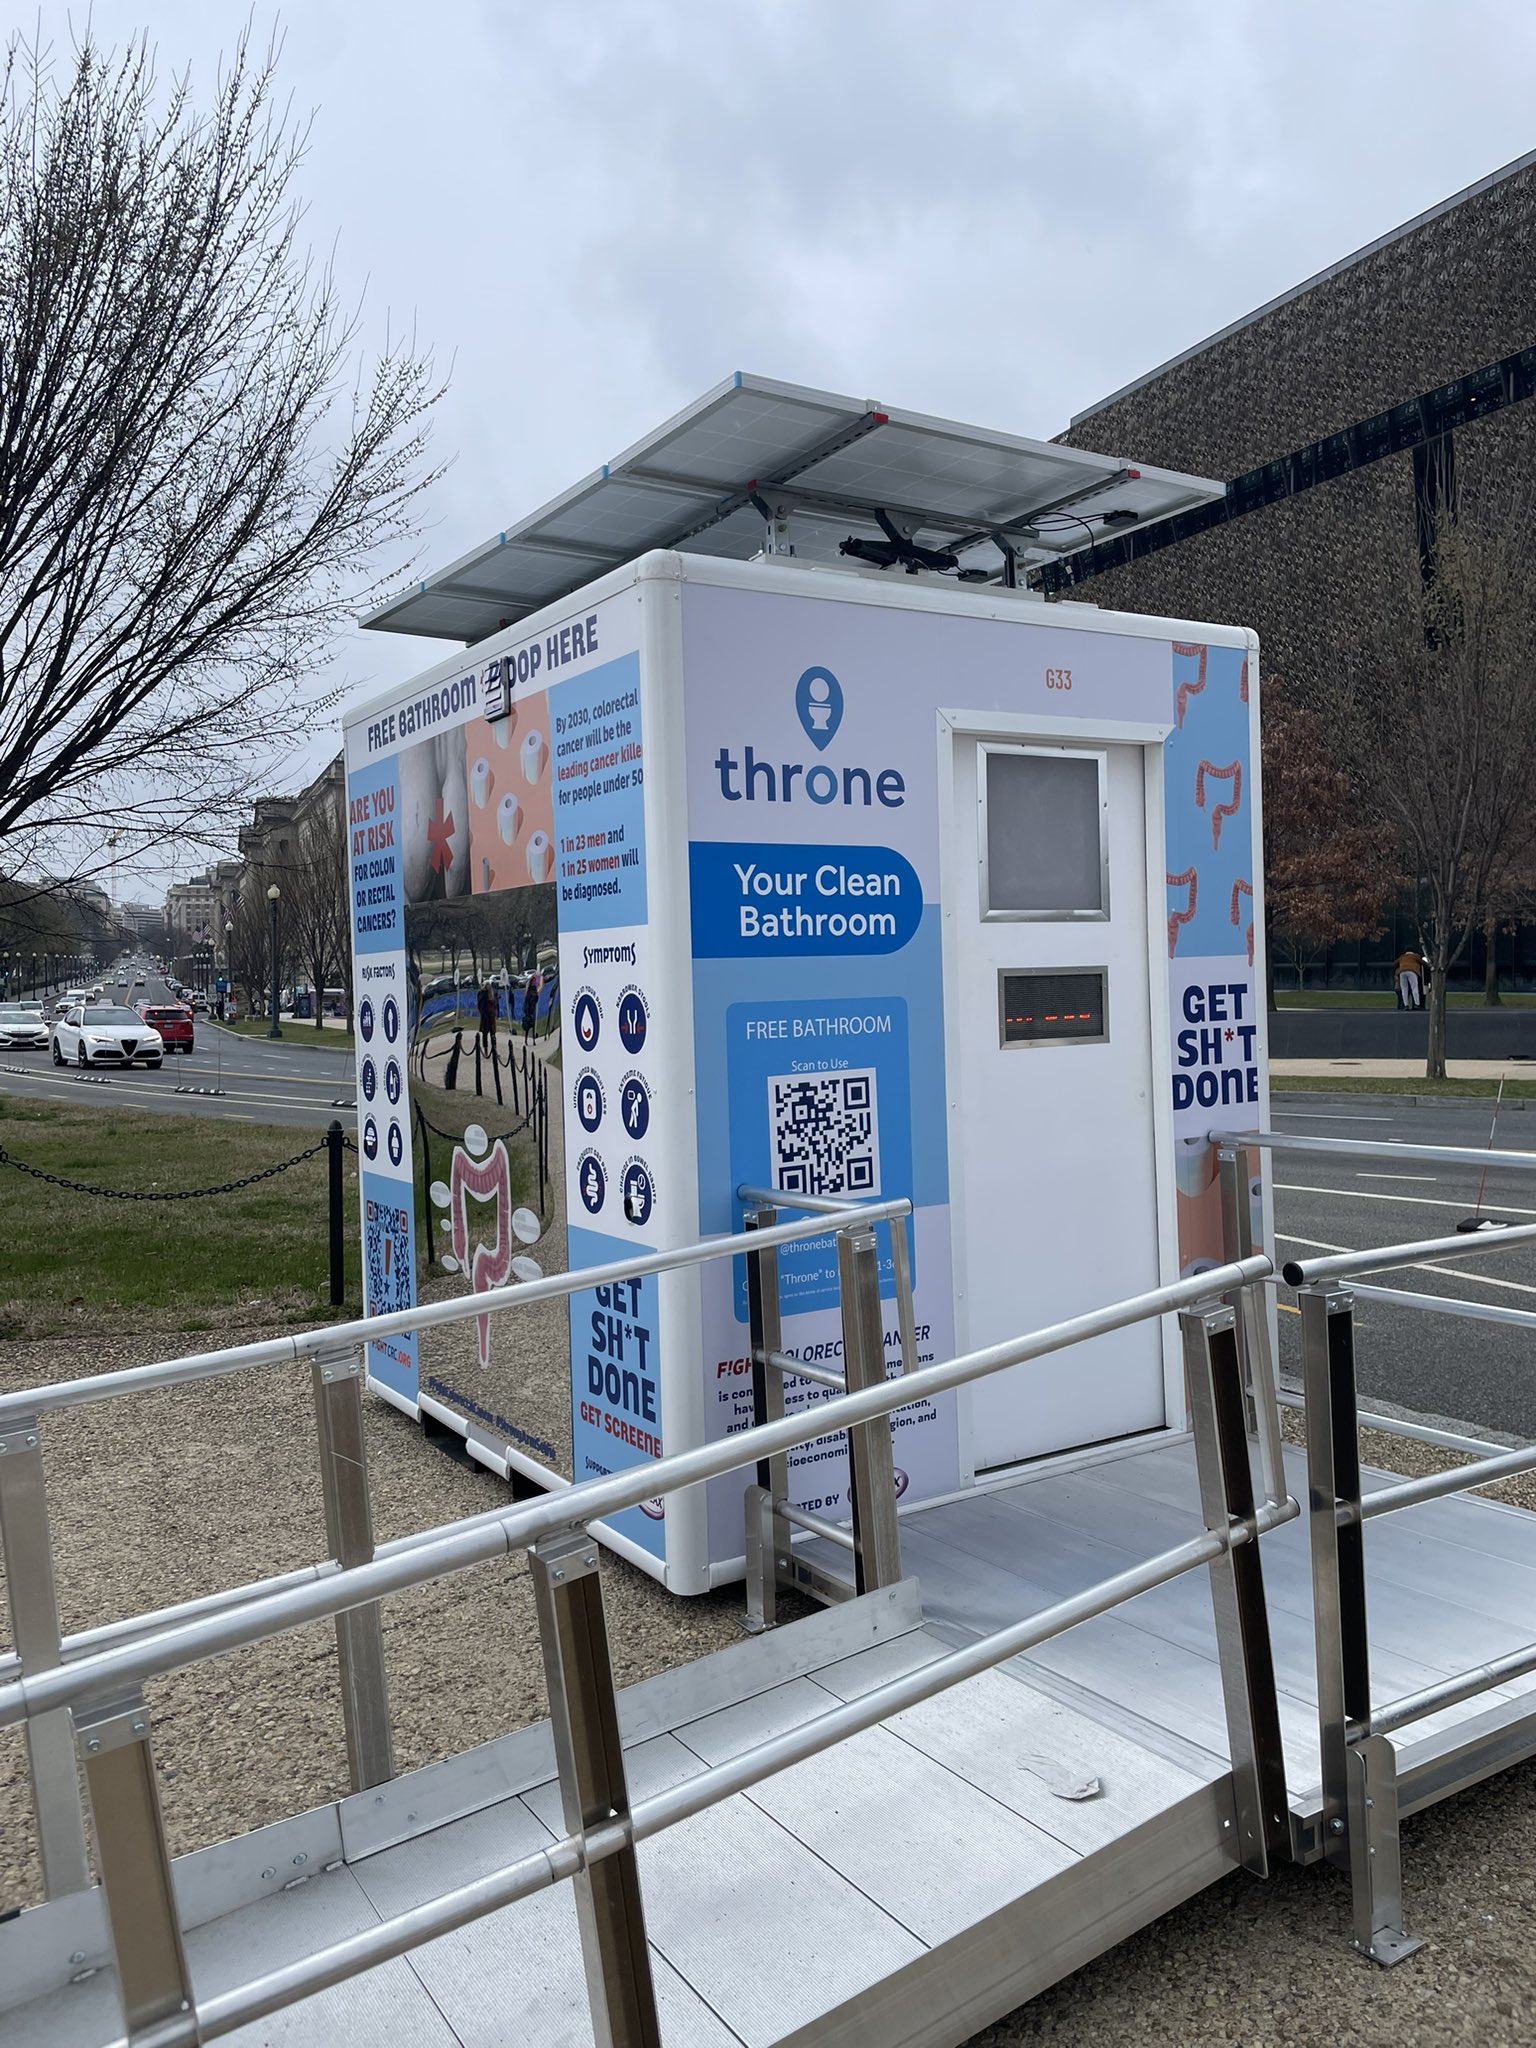 Fight Colorectal Cancer and MiraLAX® Partner to Provide Bathroom on the National Mall for Colorectal Cancer Awareness